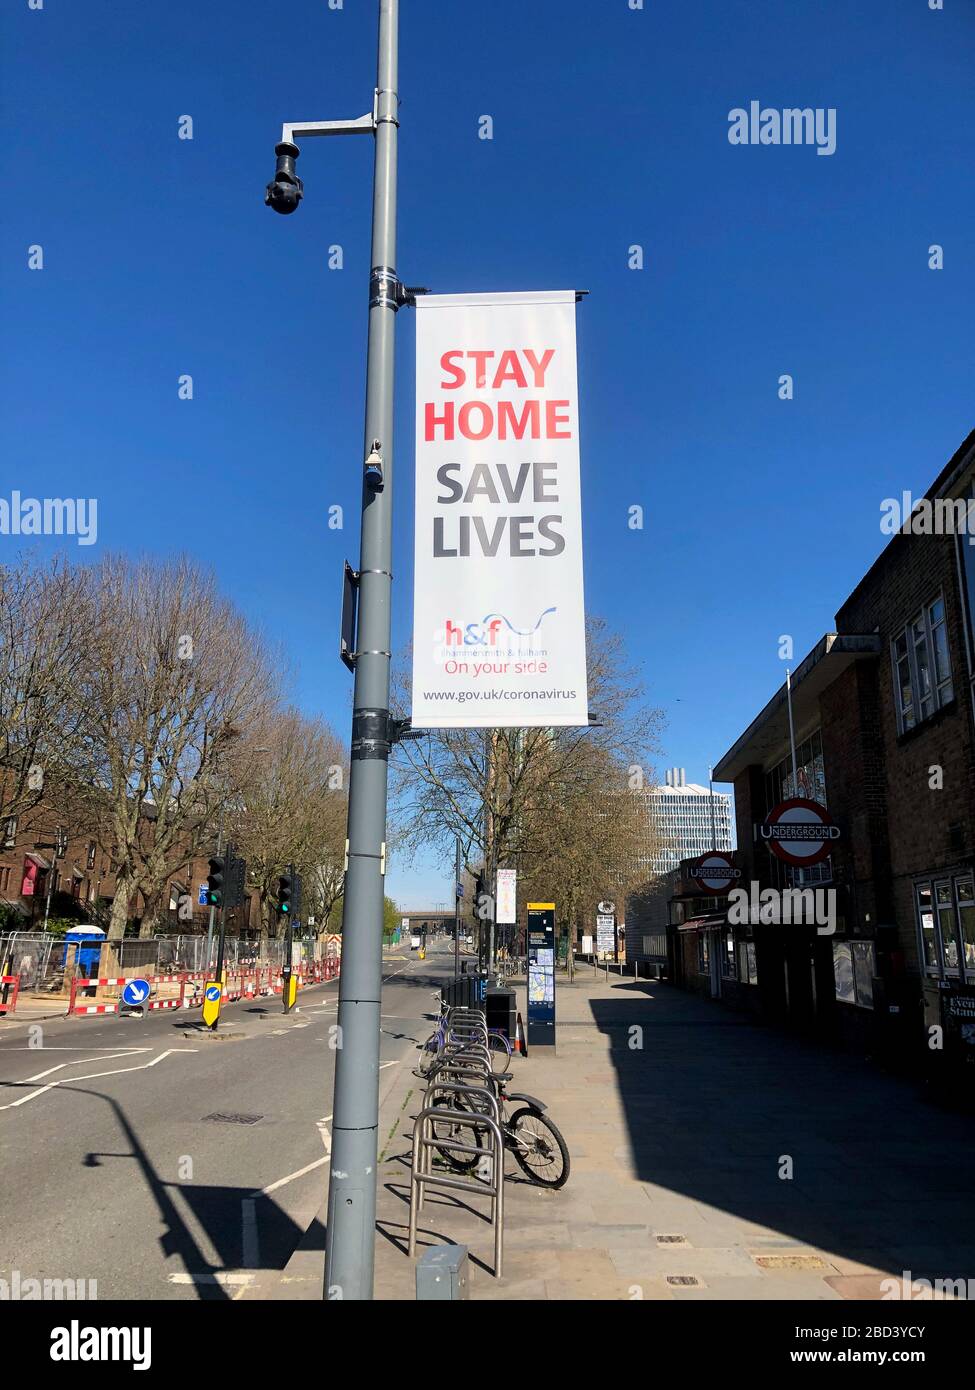 London, UK. 06th Apr, 2020. A placard that says stay home, save life hangs on a street poll around White City station to encourage locals to follows the shutdown rules.Boris Johnson, announced strict lockdown measures urging people to stay at home and only leave the house for basic food shopping, exercise once a day and essential travel to and from work. Around 50,000 reported cases of the coronavirus (COVID-19) in the United Kingdom and 5,000 deaths. The country is in its third week of lockdown measures aimed at slowing the spread of the virus. Credit: SOPA Images Limited/Alamy Live News Stock Photo